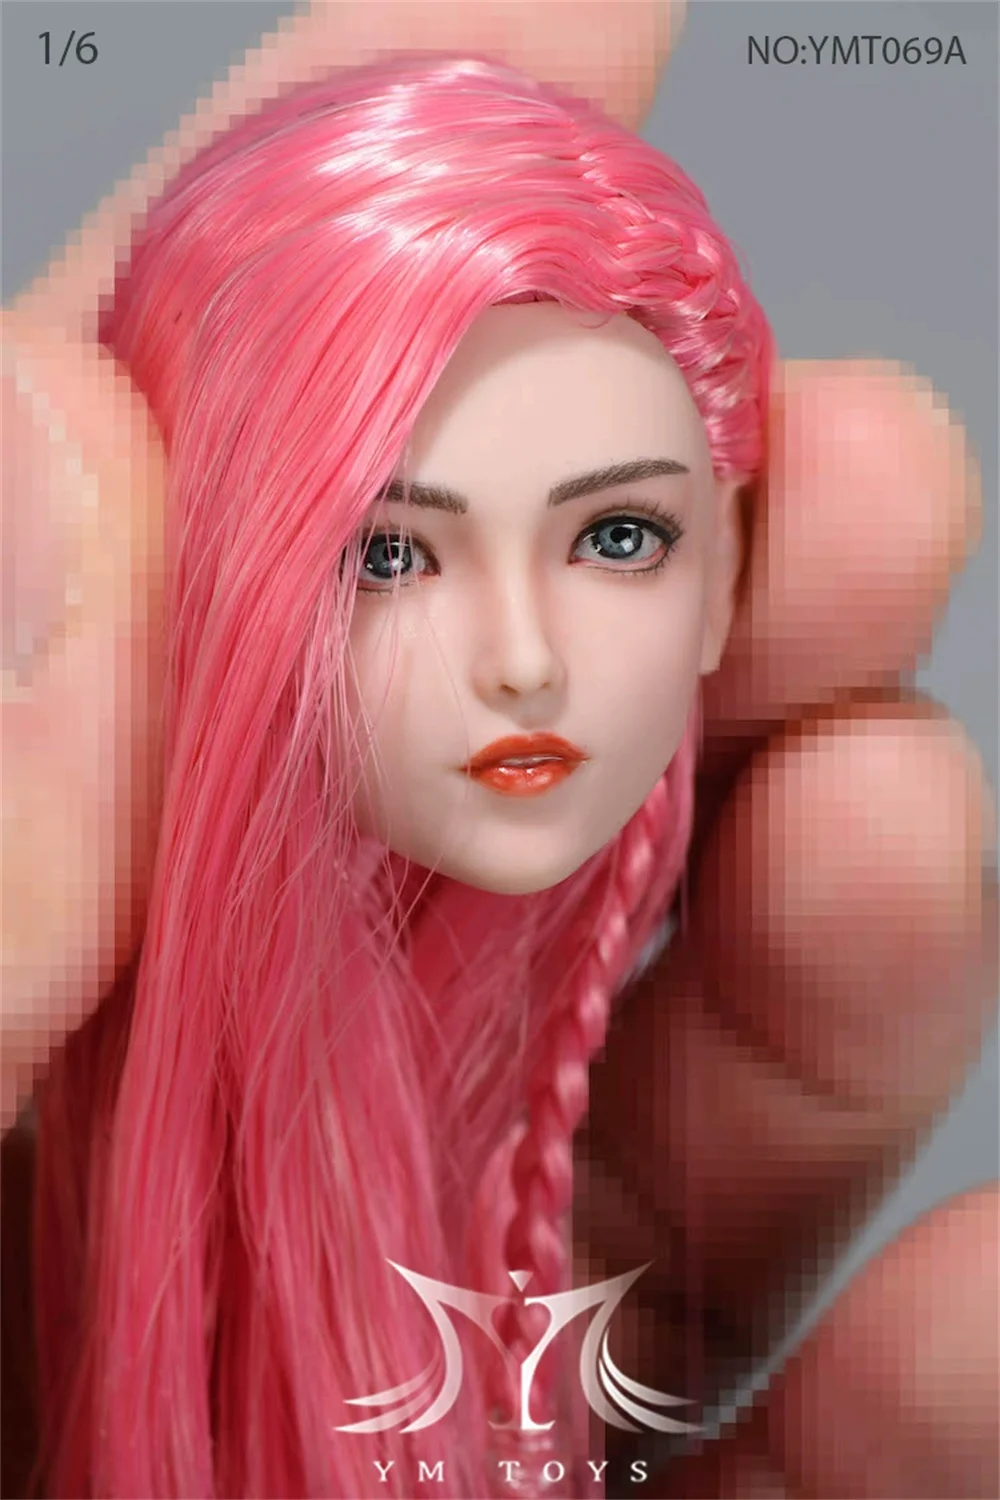 

Luoli Girl Head Sculpture 1/6 Scale Head Sculpt Female YMTOYS YMT069 AC Pink Hair for 12'' Girl Action Figure Toys Collection